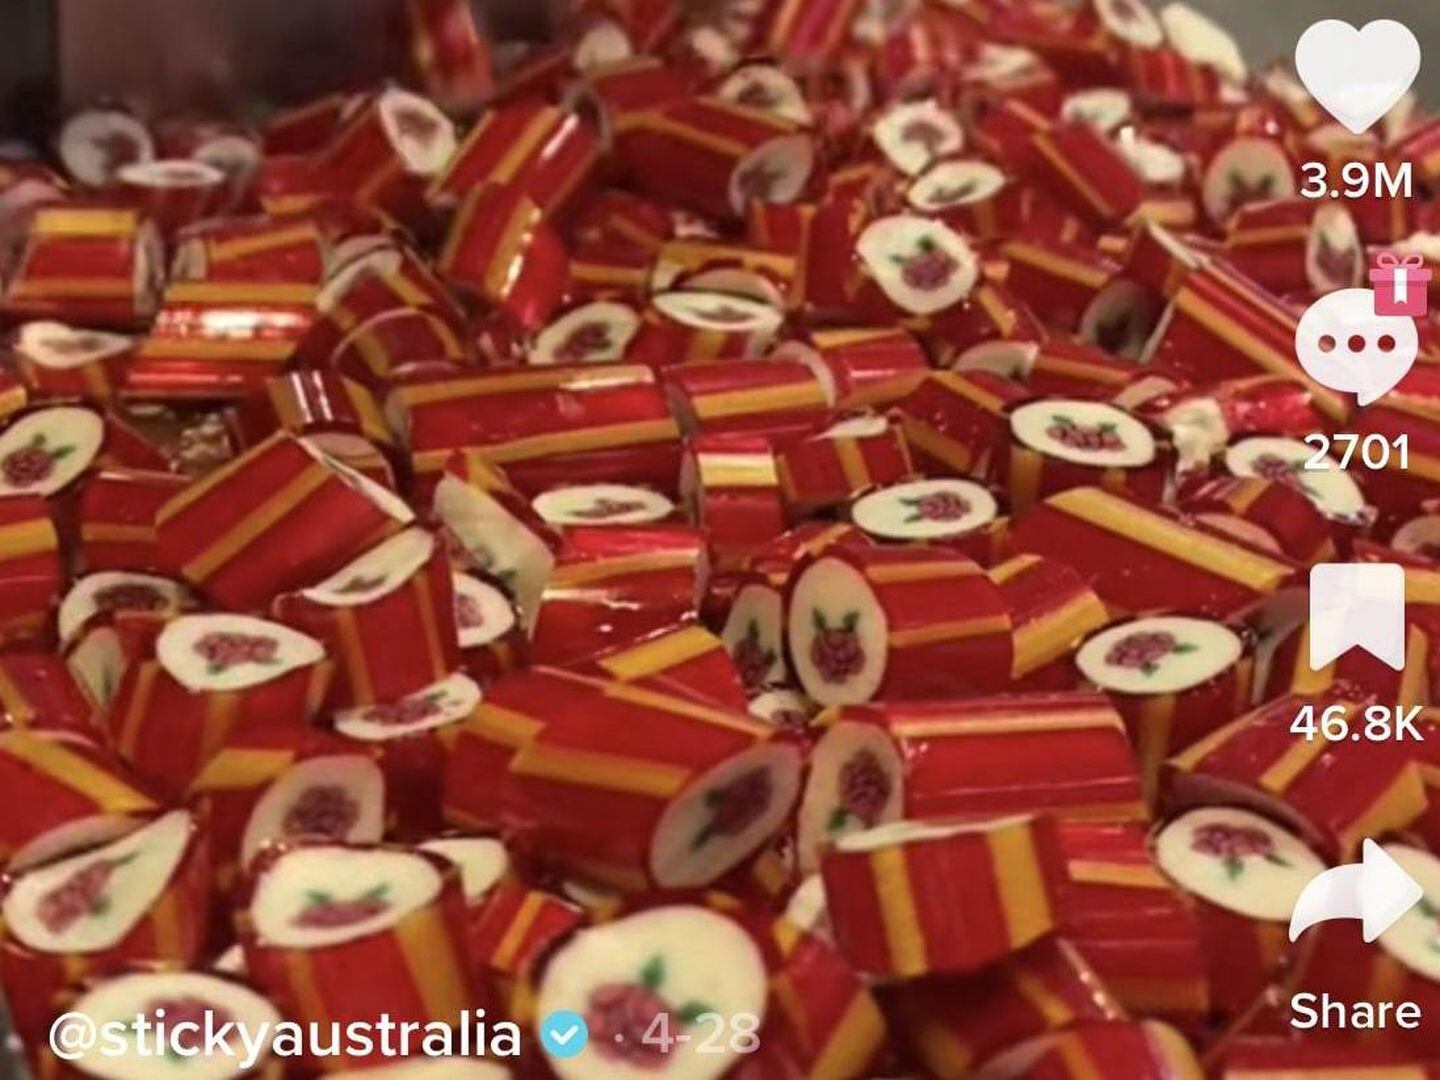 How TikTok helped save this small Australian candy shop